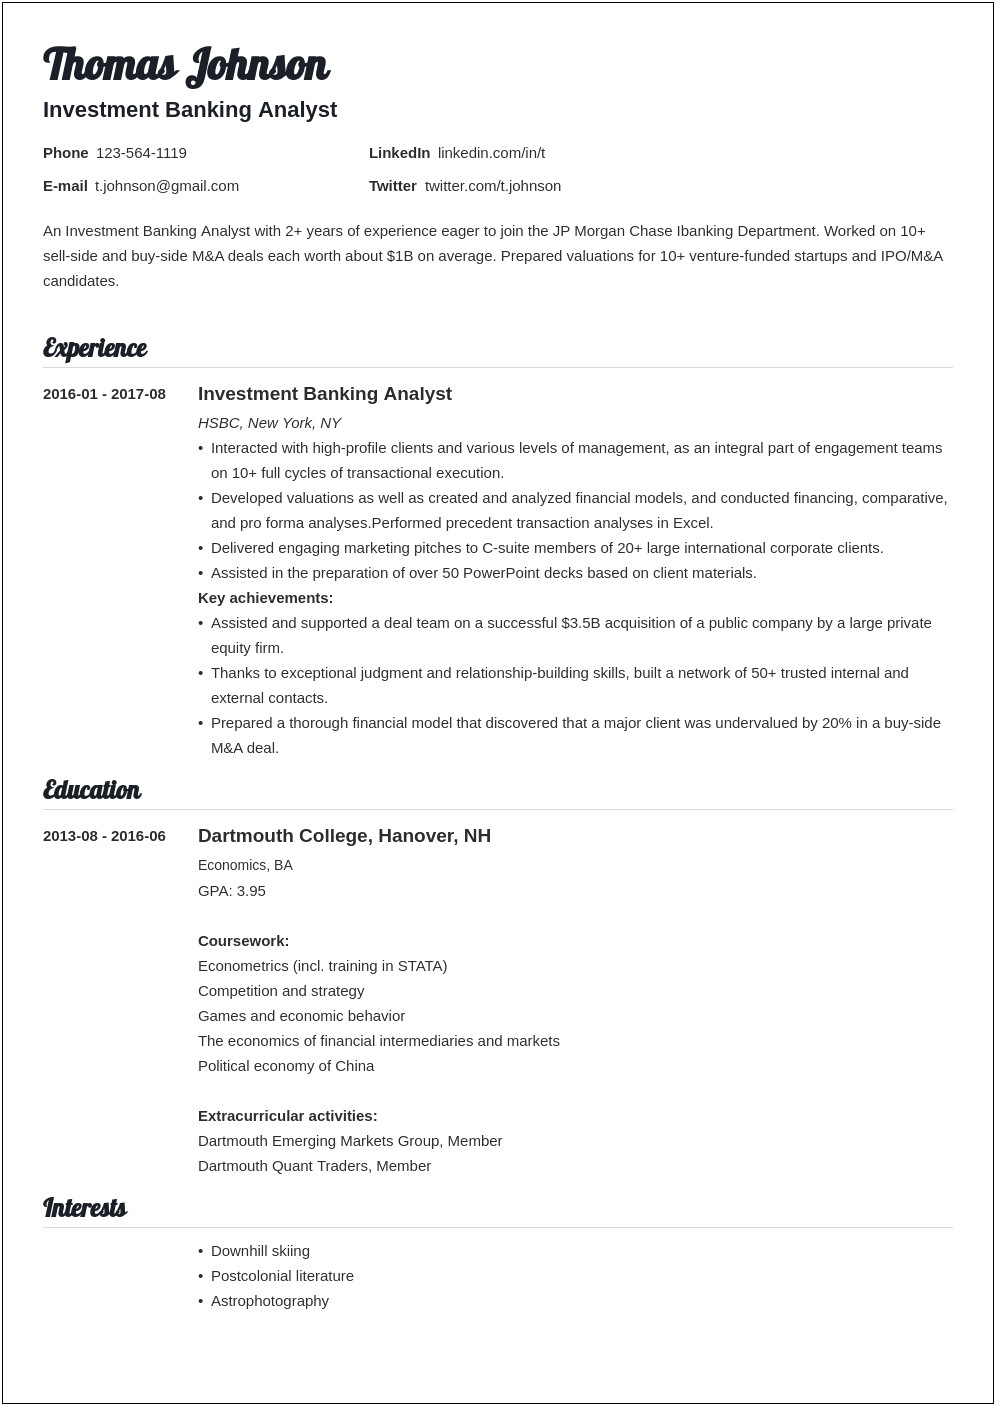 Sample Post Investment Banking Resume